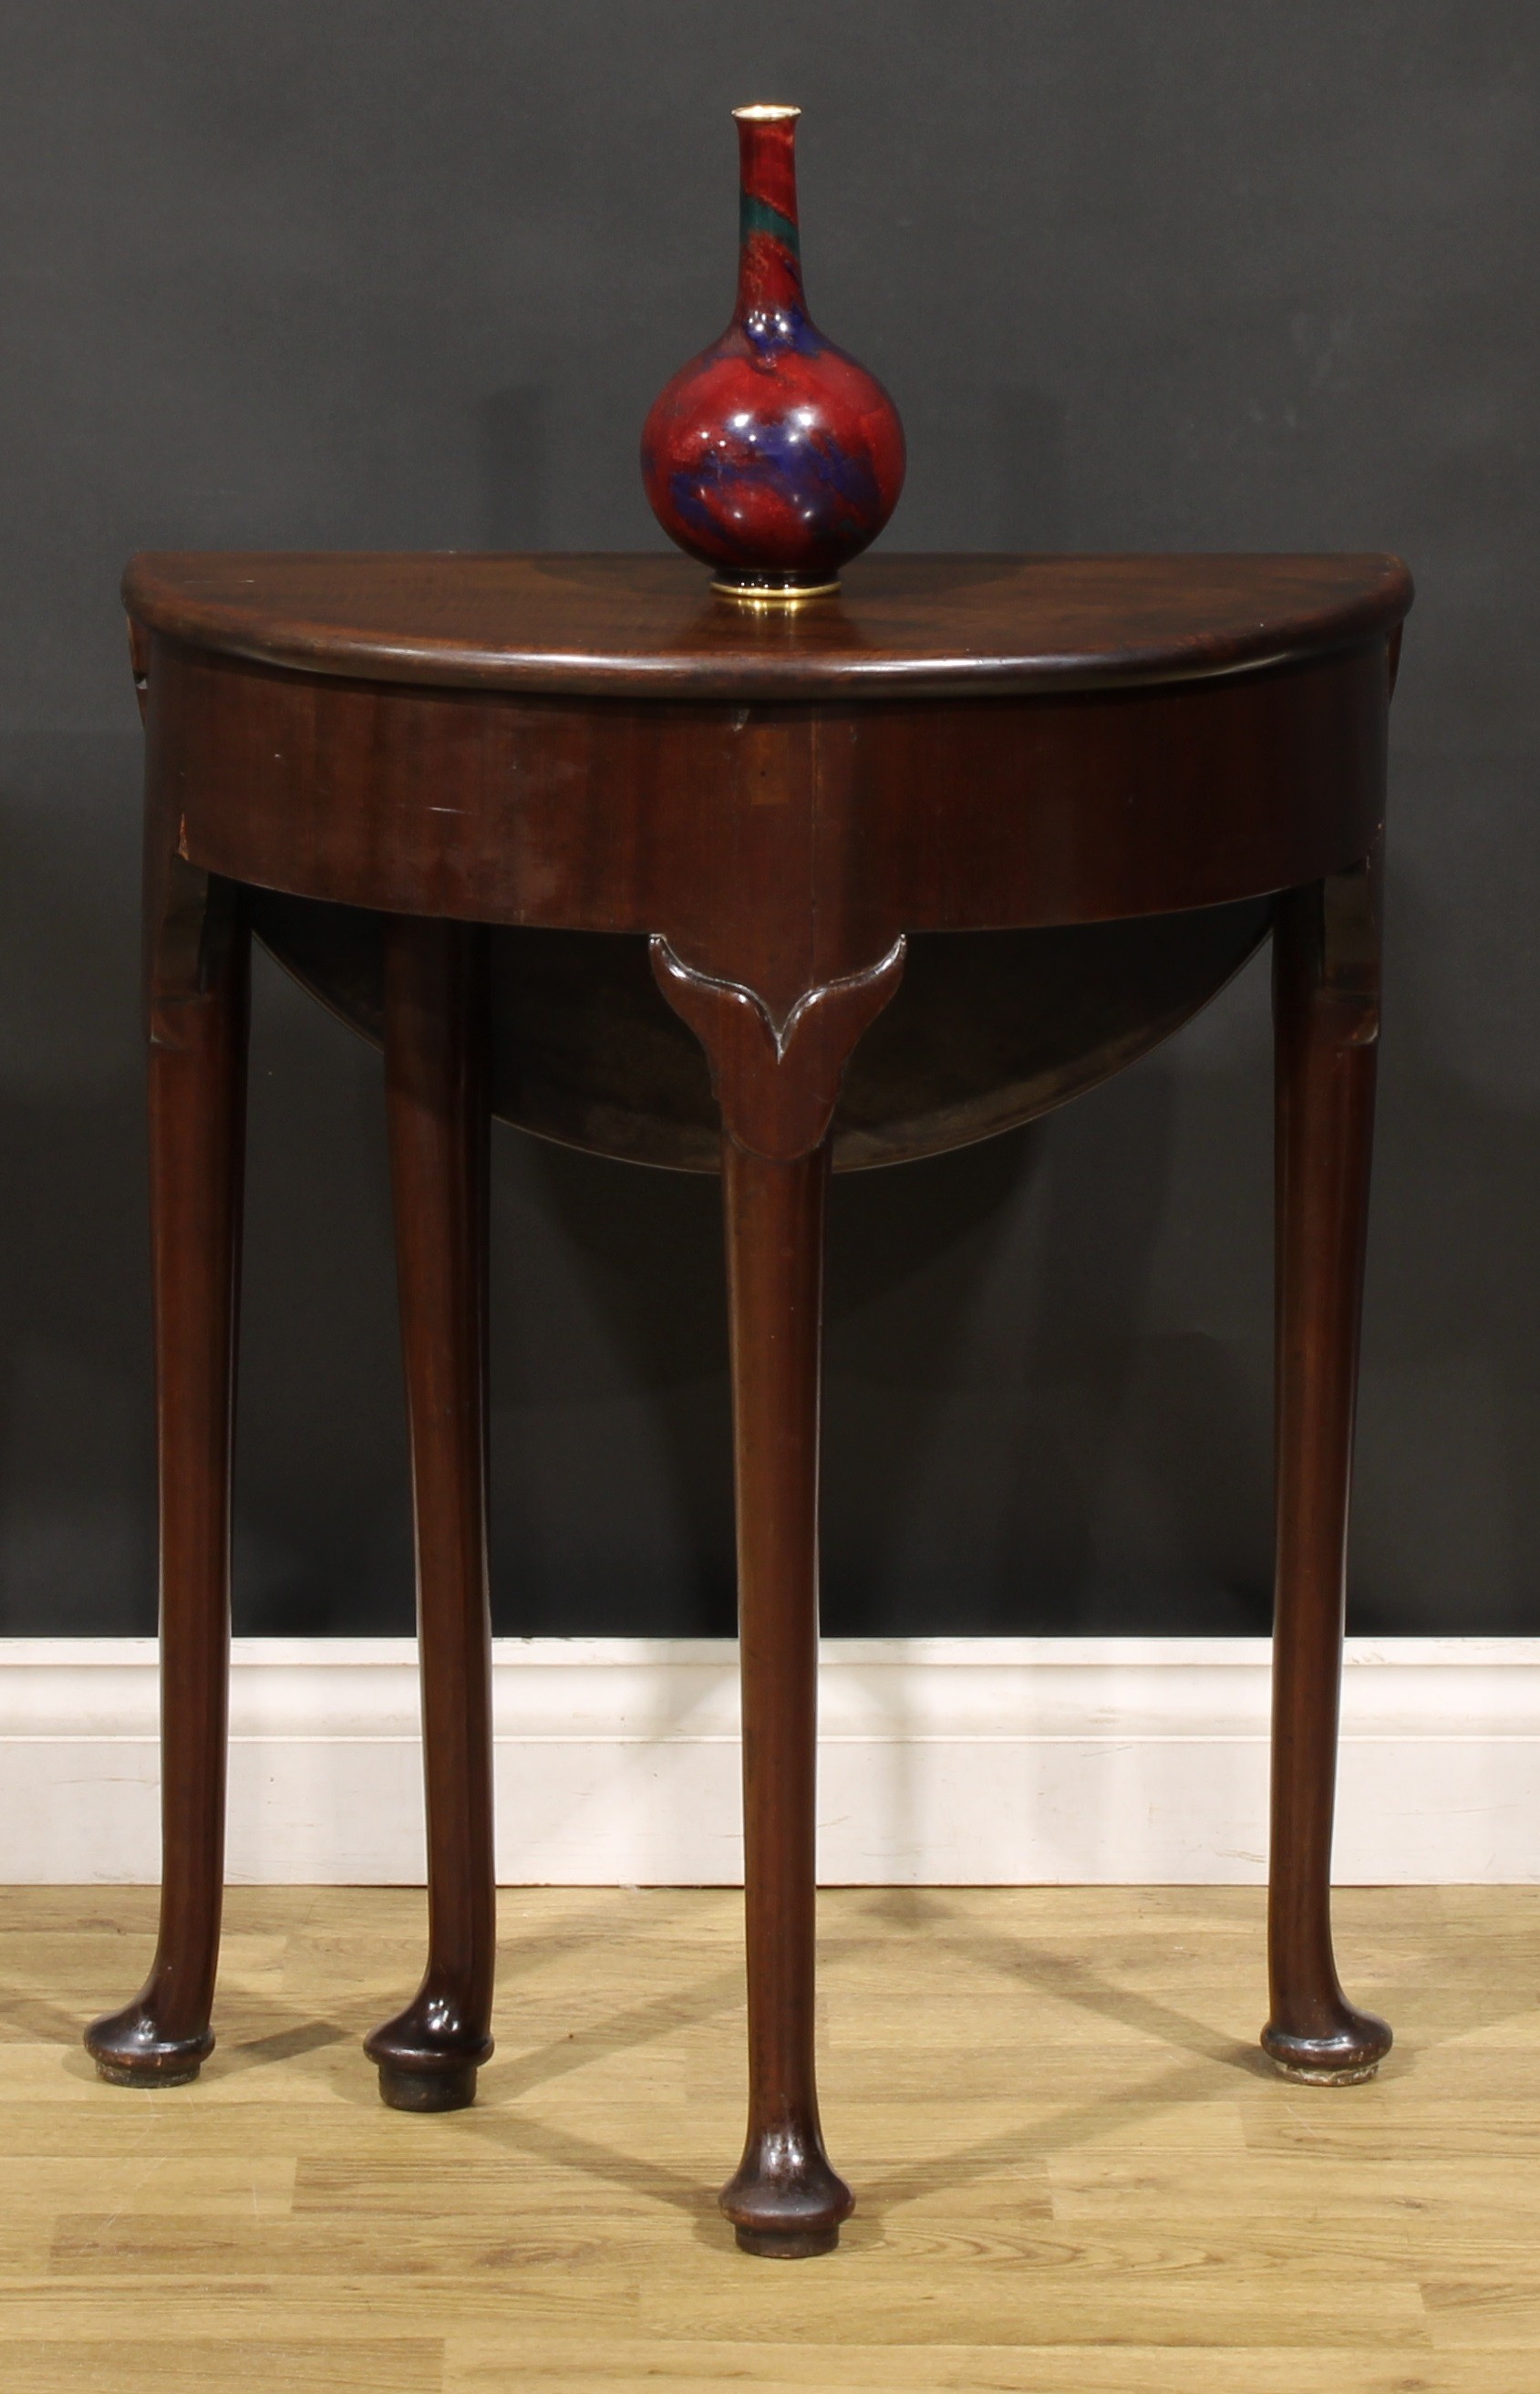 A 19th century mahogany gateleg lamp or occasional table, fall leaf, straightened cabriole legs, pad